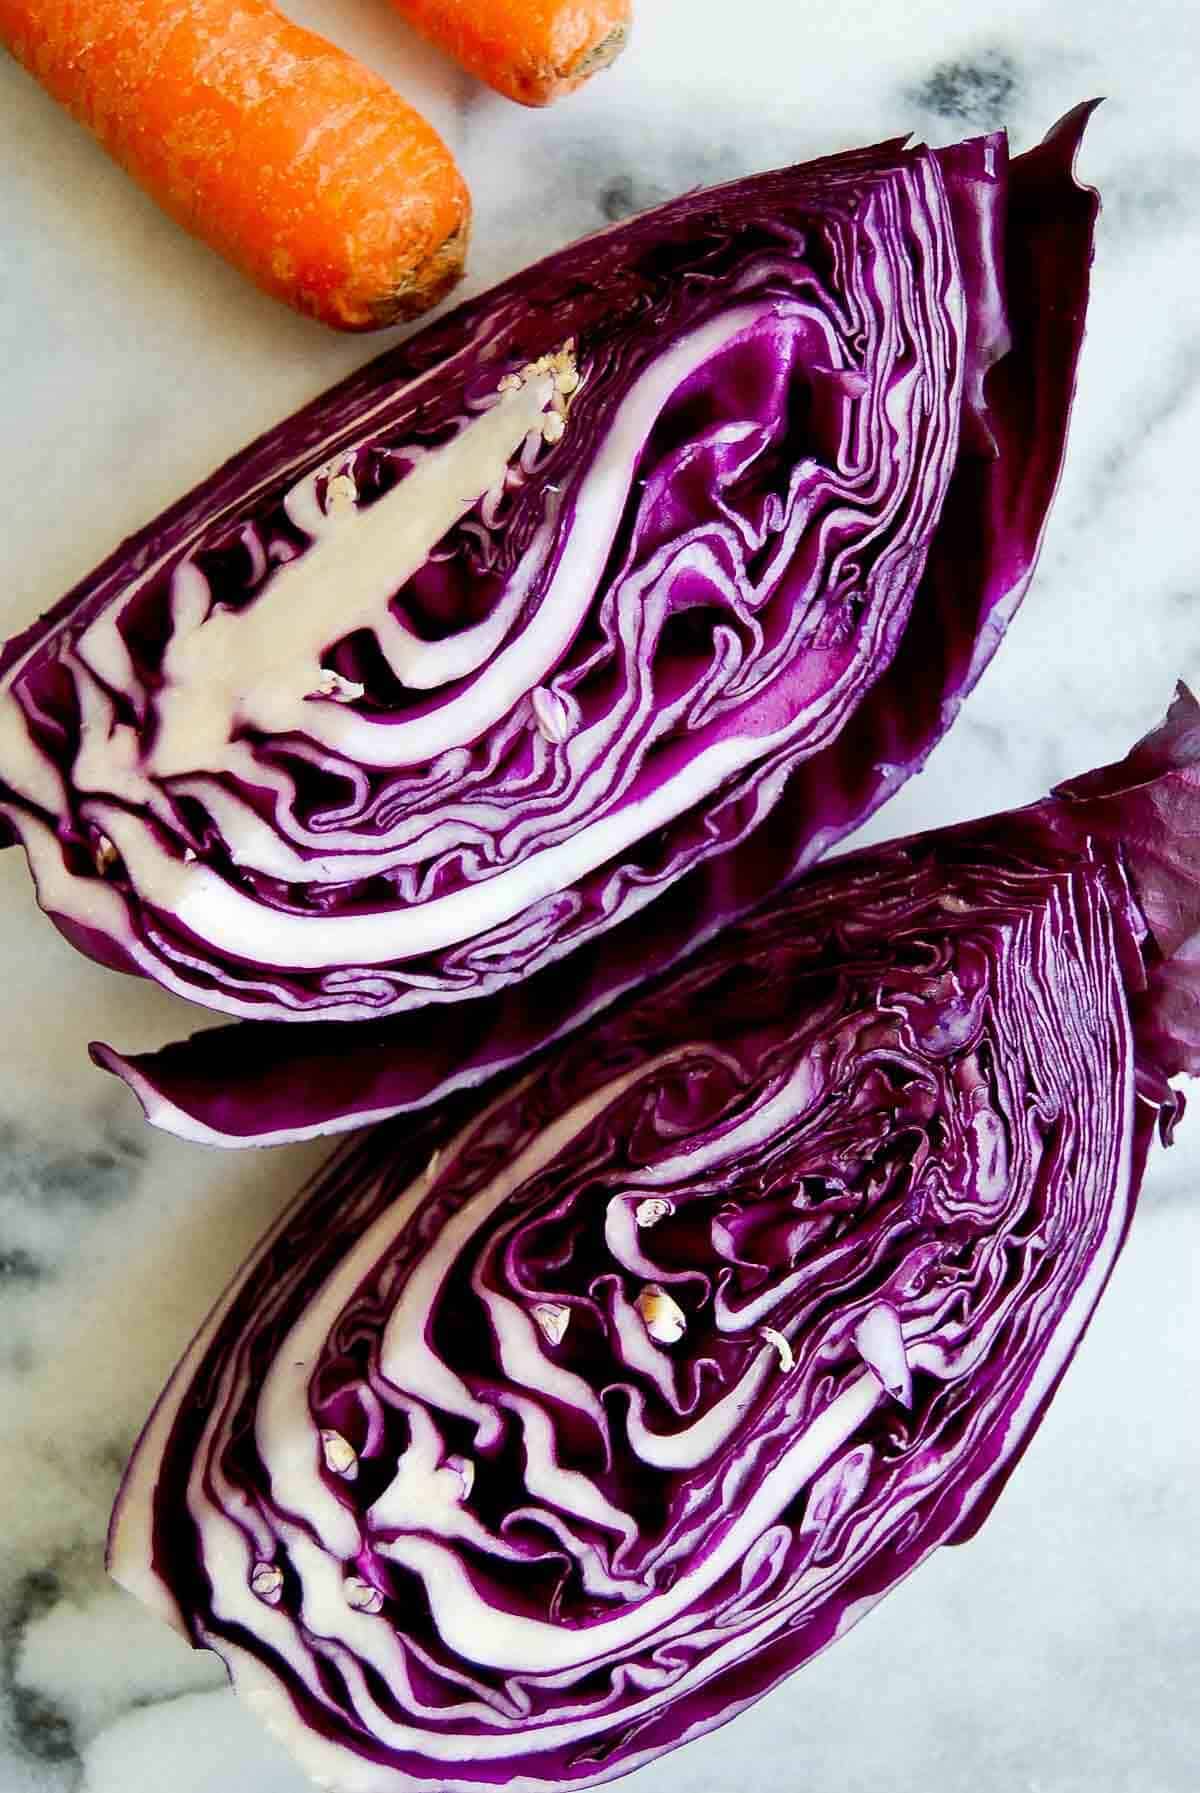 2 quarter red cabbages on cutting board.